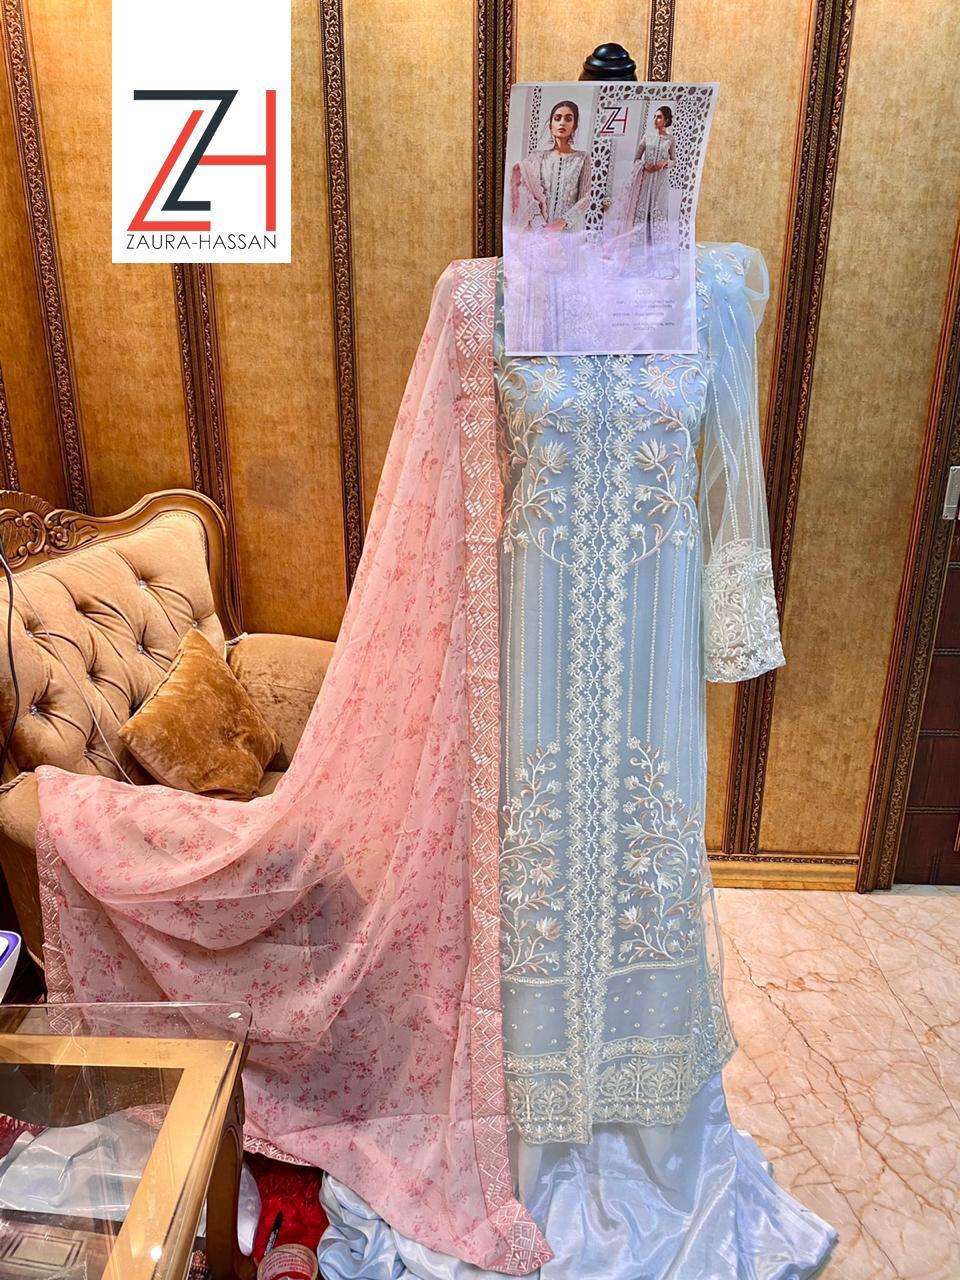 QALAMKAR BY ZAURA HASSAN 1208 TO 1209 SERIES DESIGNER FESTIVE SUITS COLLECTION BEAUTIFUL STYLISH FANCY COLORFUL PARTY WEAR & OCCASIONAL WEAR BUTTERFLY NET WITH EMBROIDERED DRESSES AT WHOLESALE PRICE